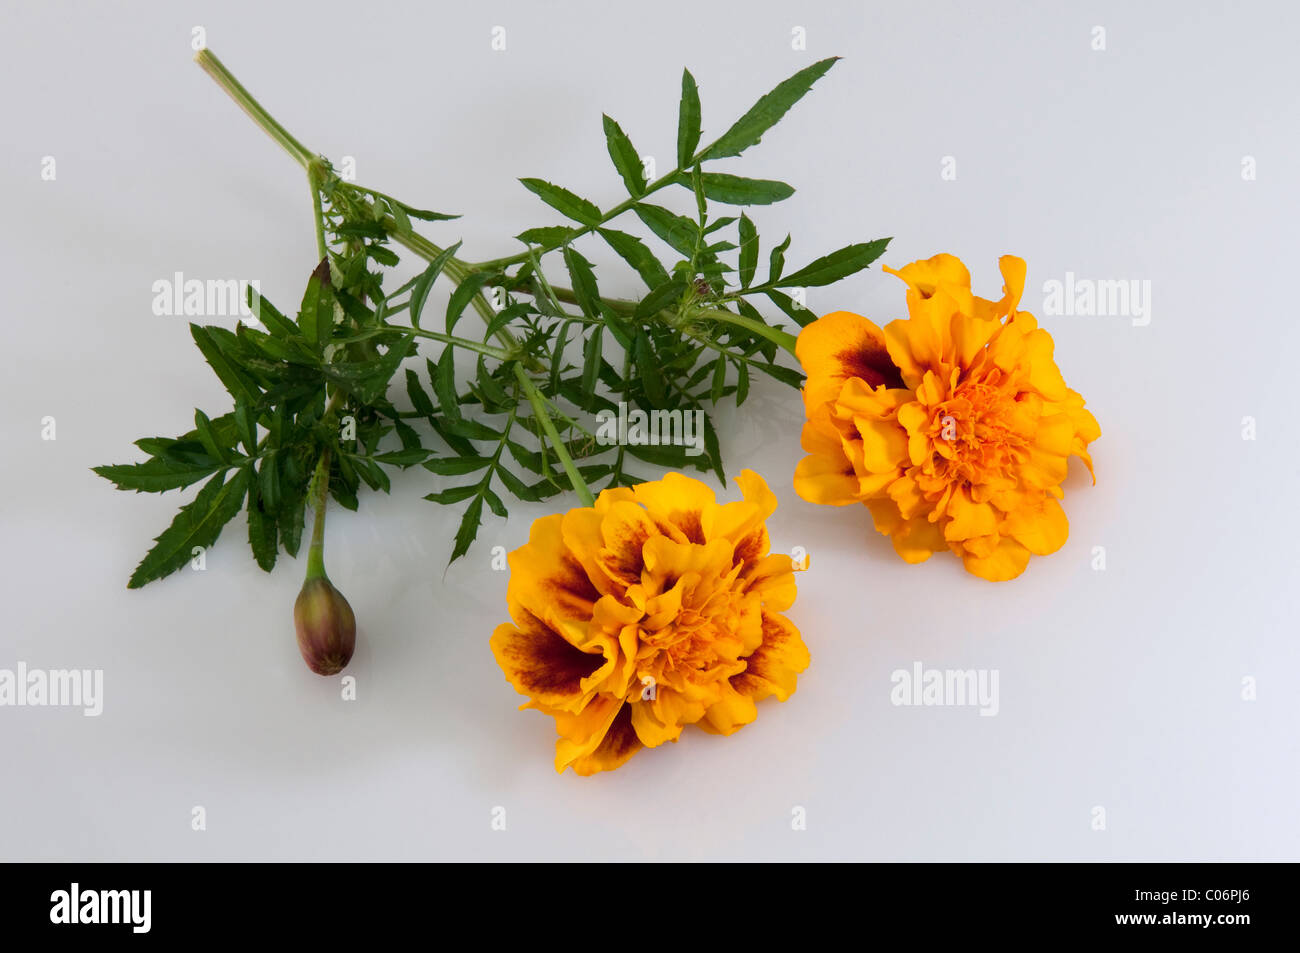 Mexican Marigold (Tagetes erecta), flowering stem. Studio picture against a white background. Stock Photo